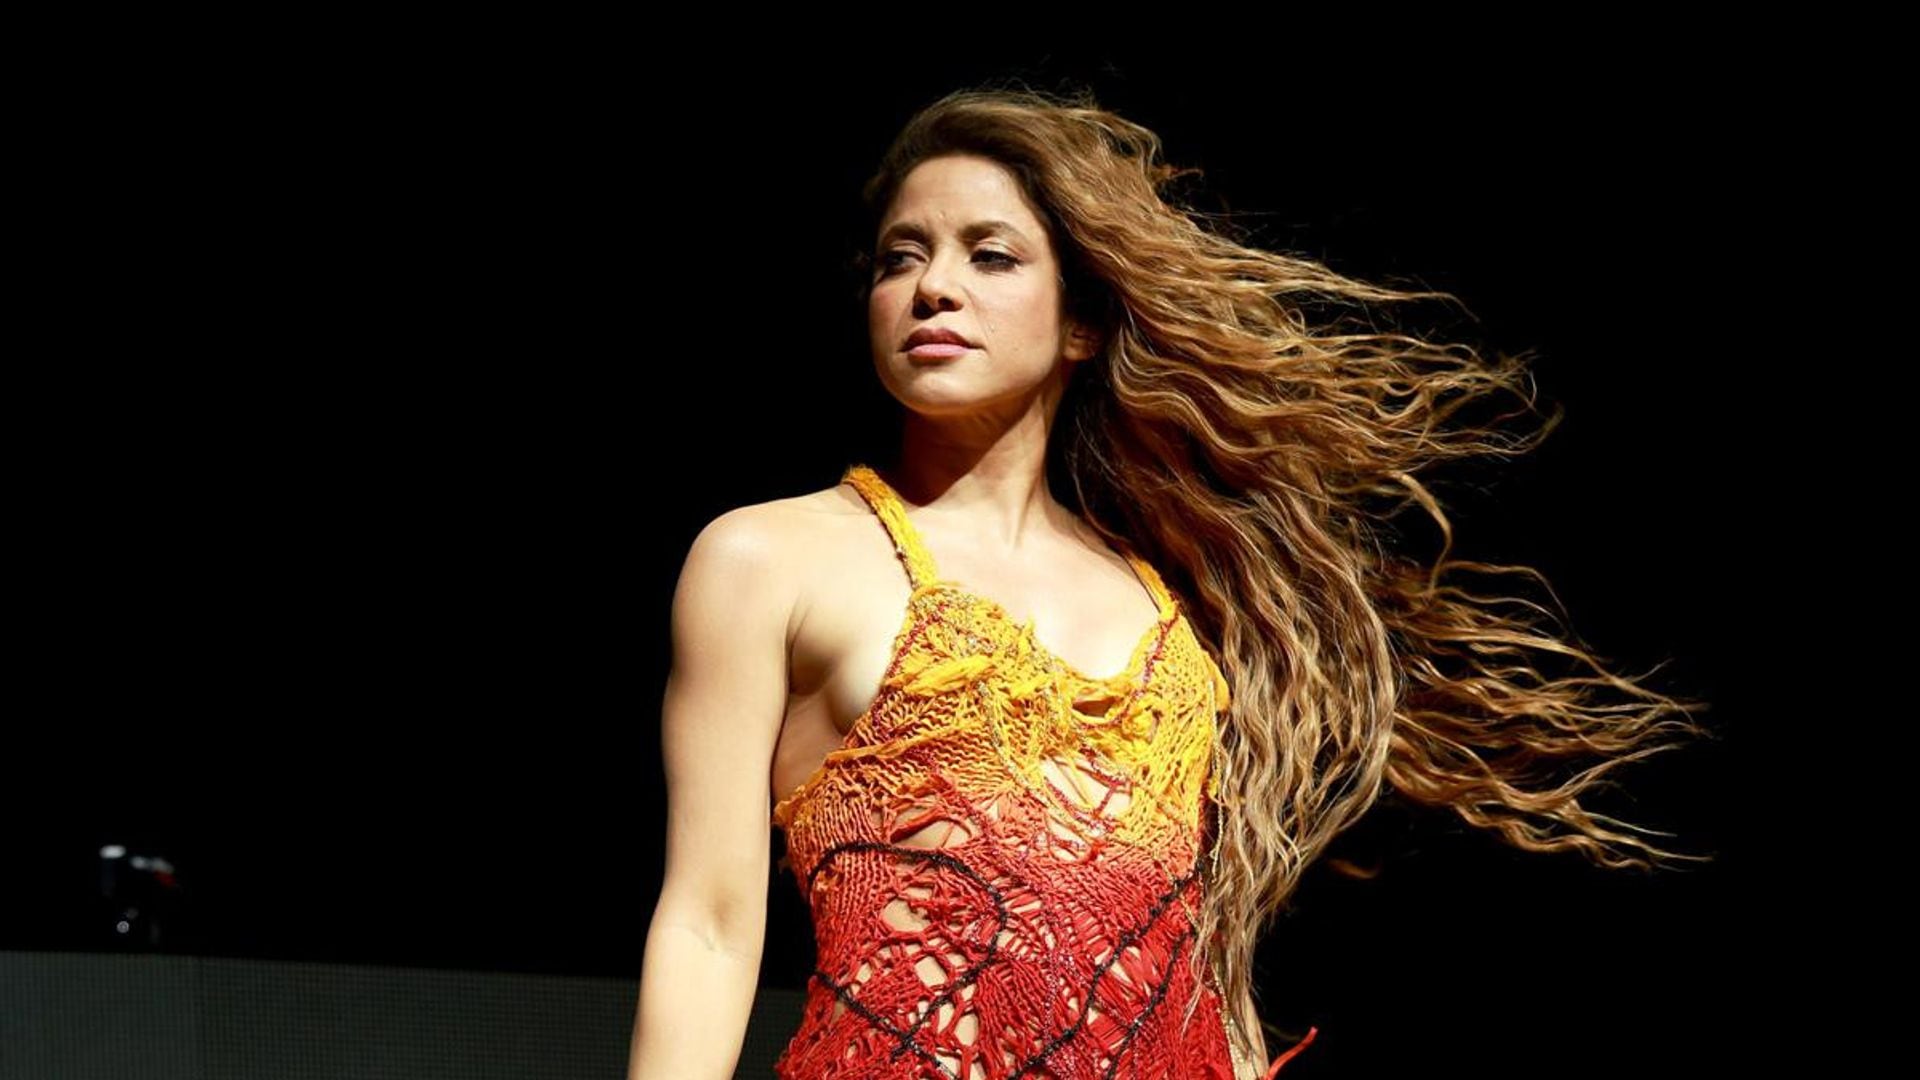 Shakira’s Tour Dates: Check here if ‘Las Mujeres Ya No Lloran World Tour’ is visiting your city